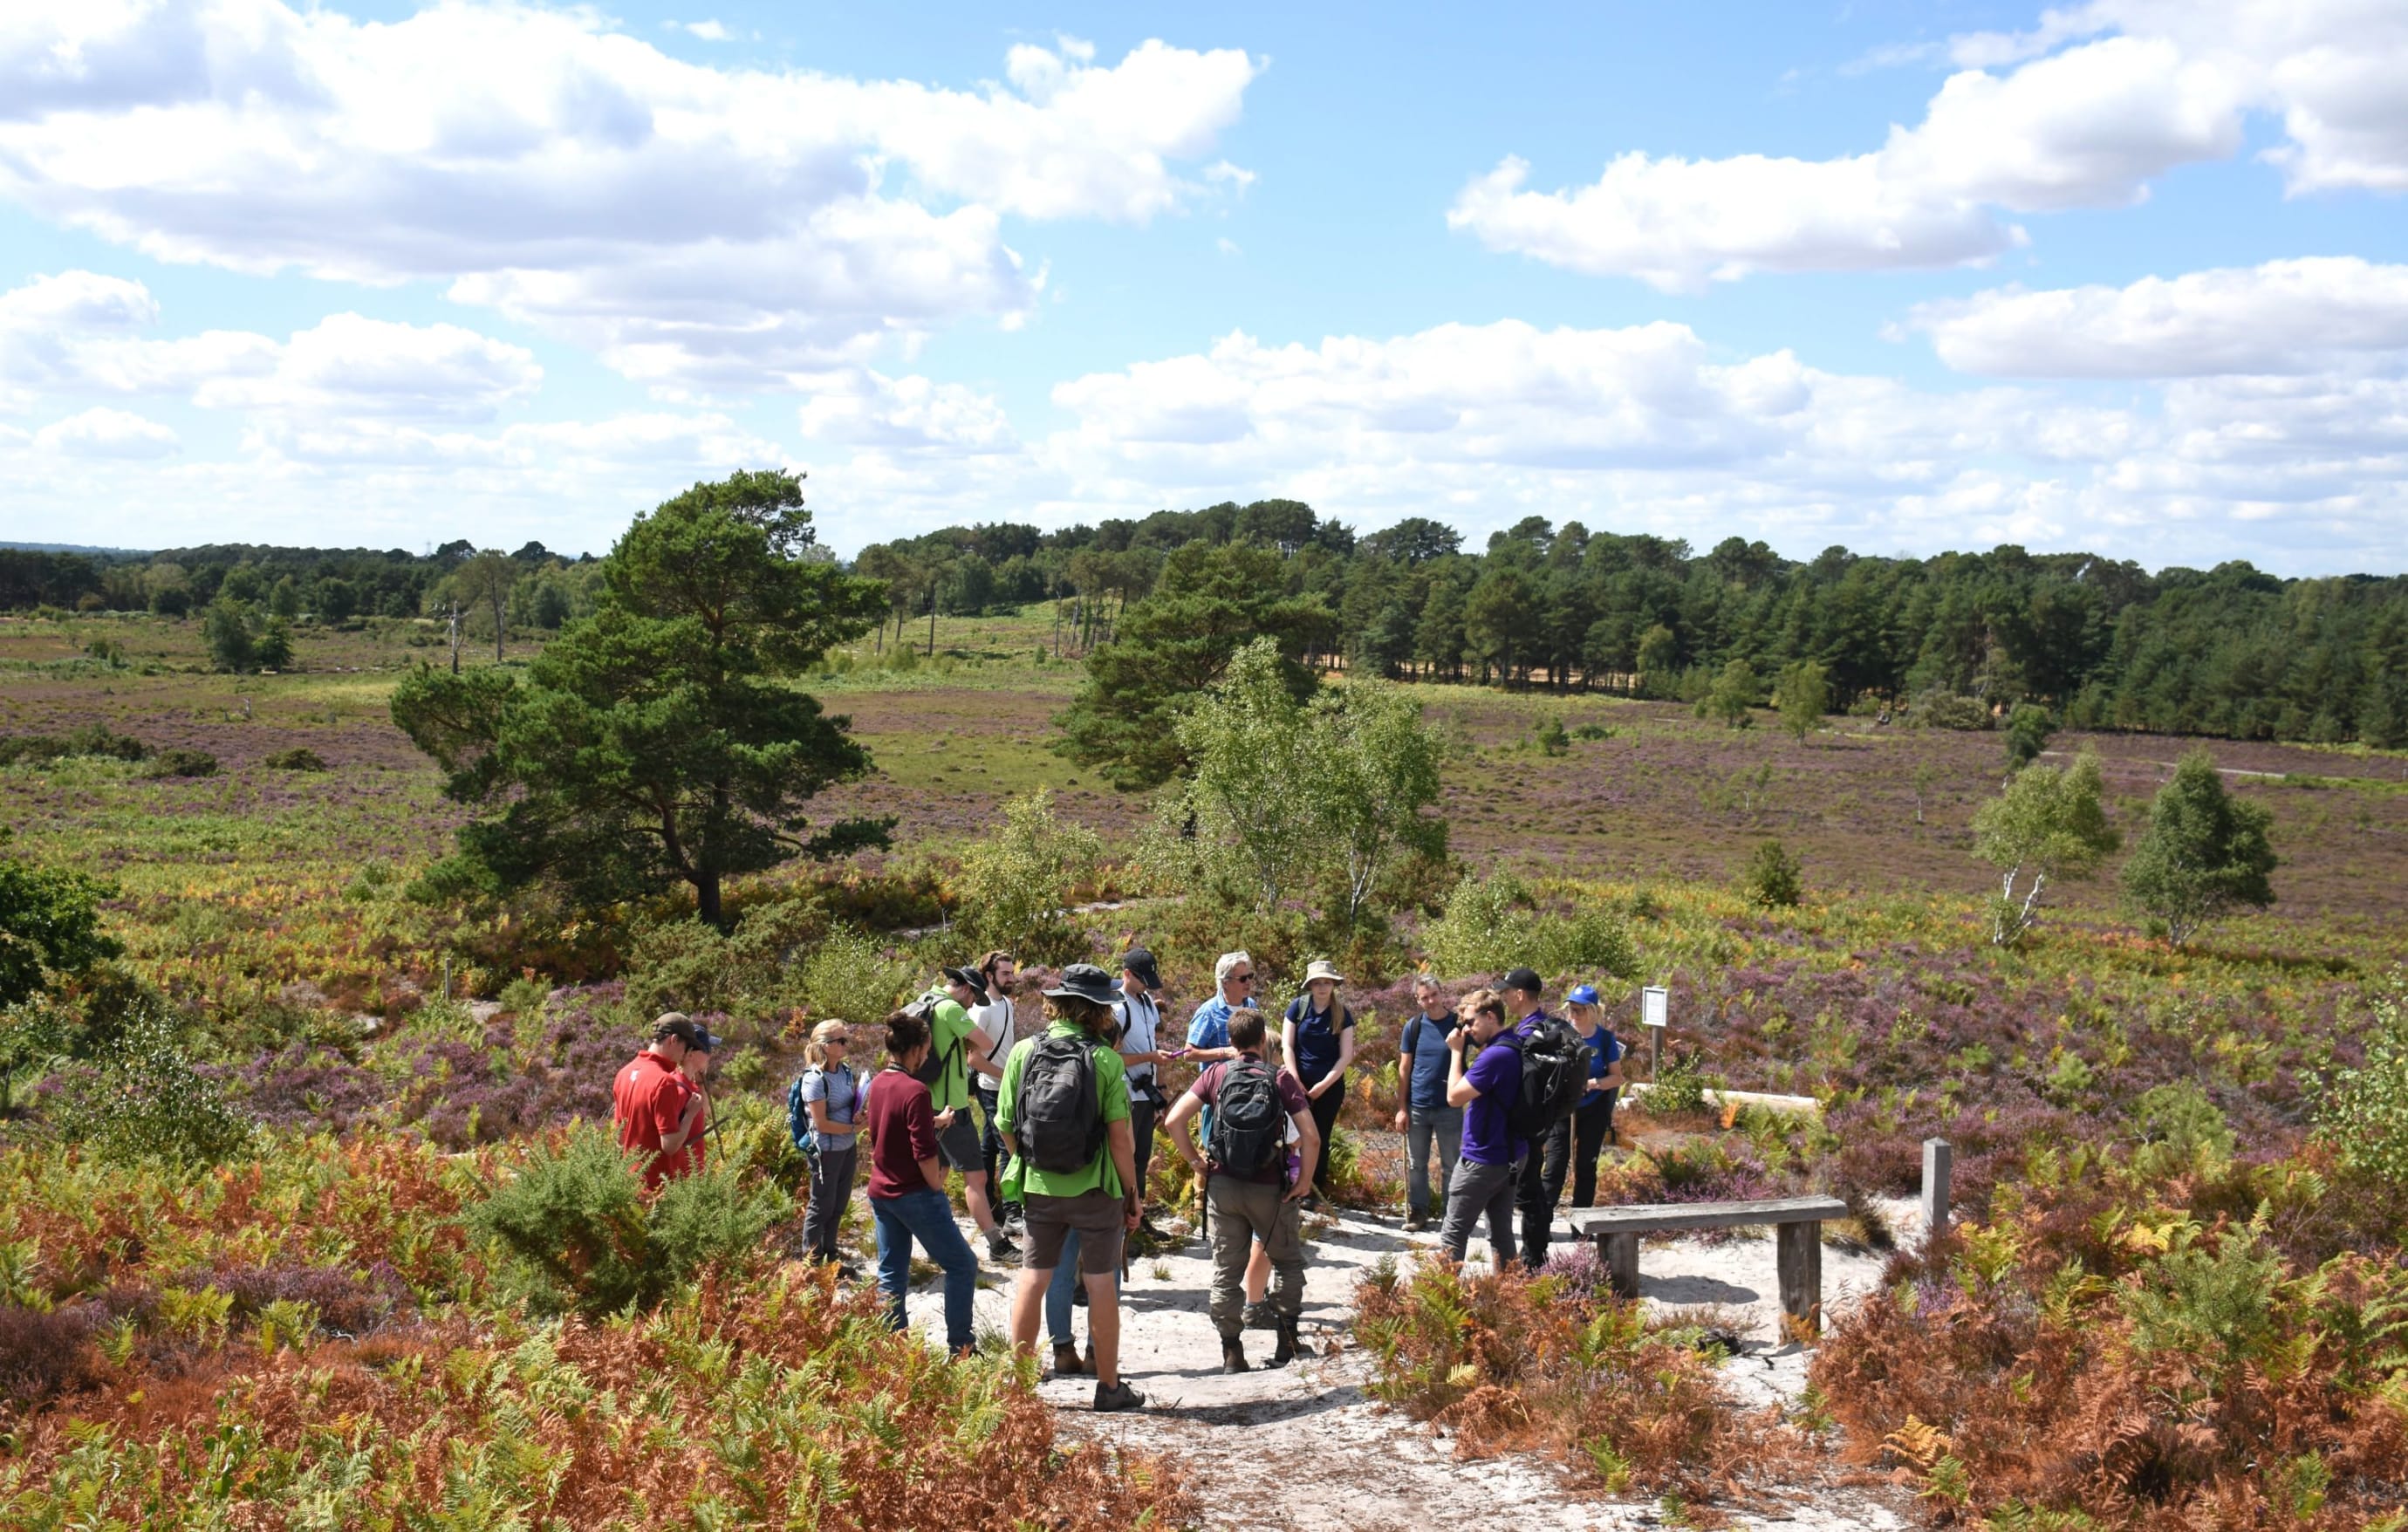 Snakes in the Heather (SitH) Reptile Survey Training Event - Avon heath Country Park 2022